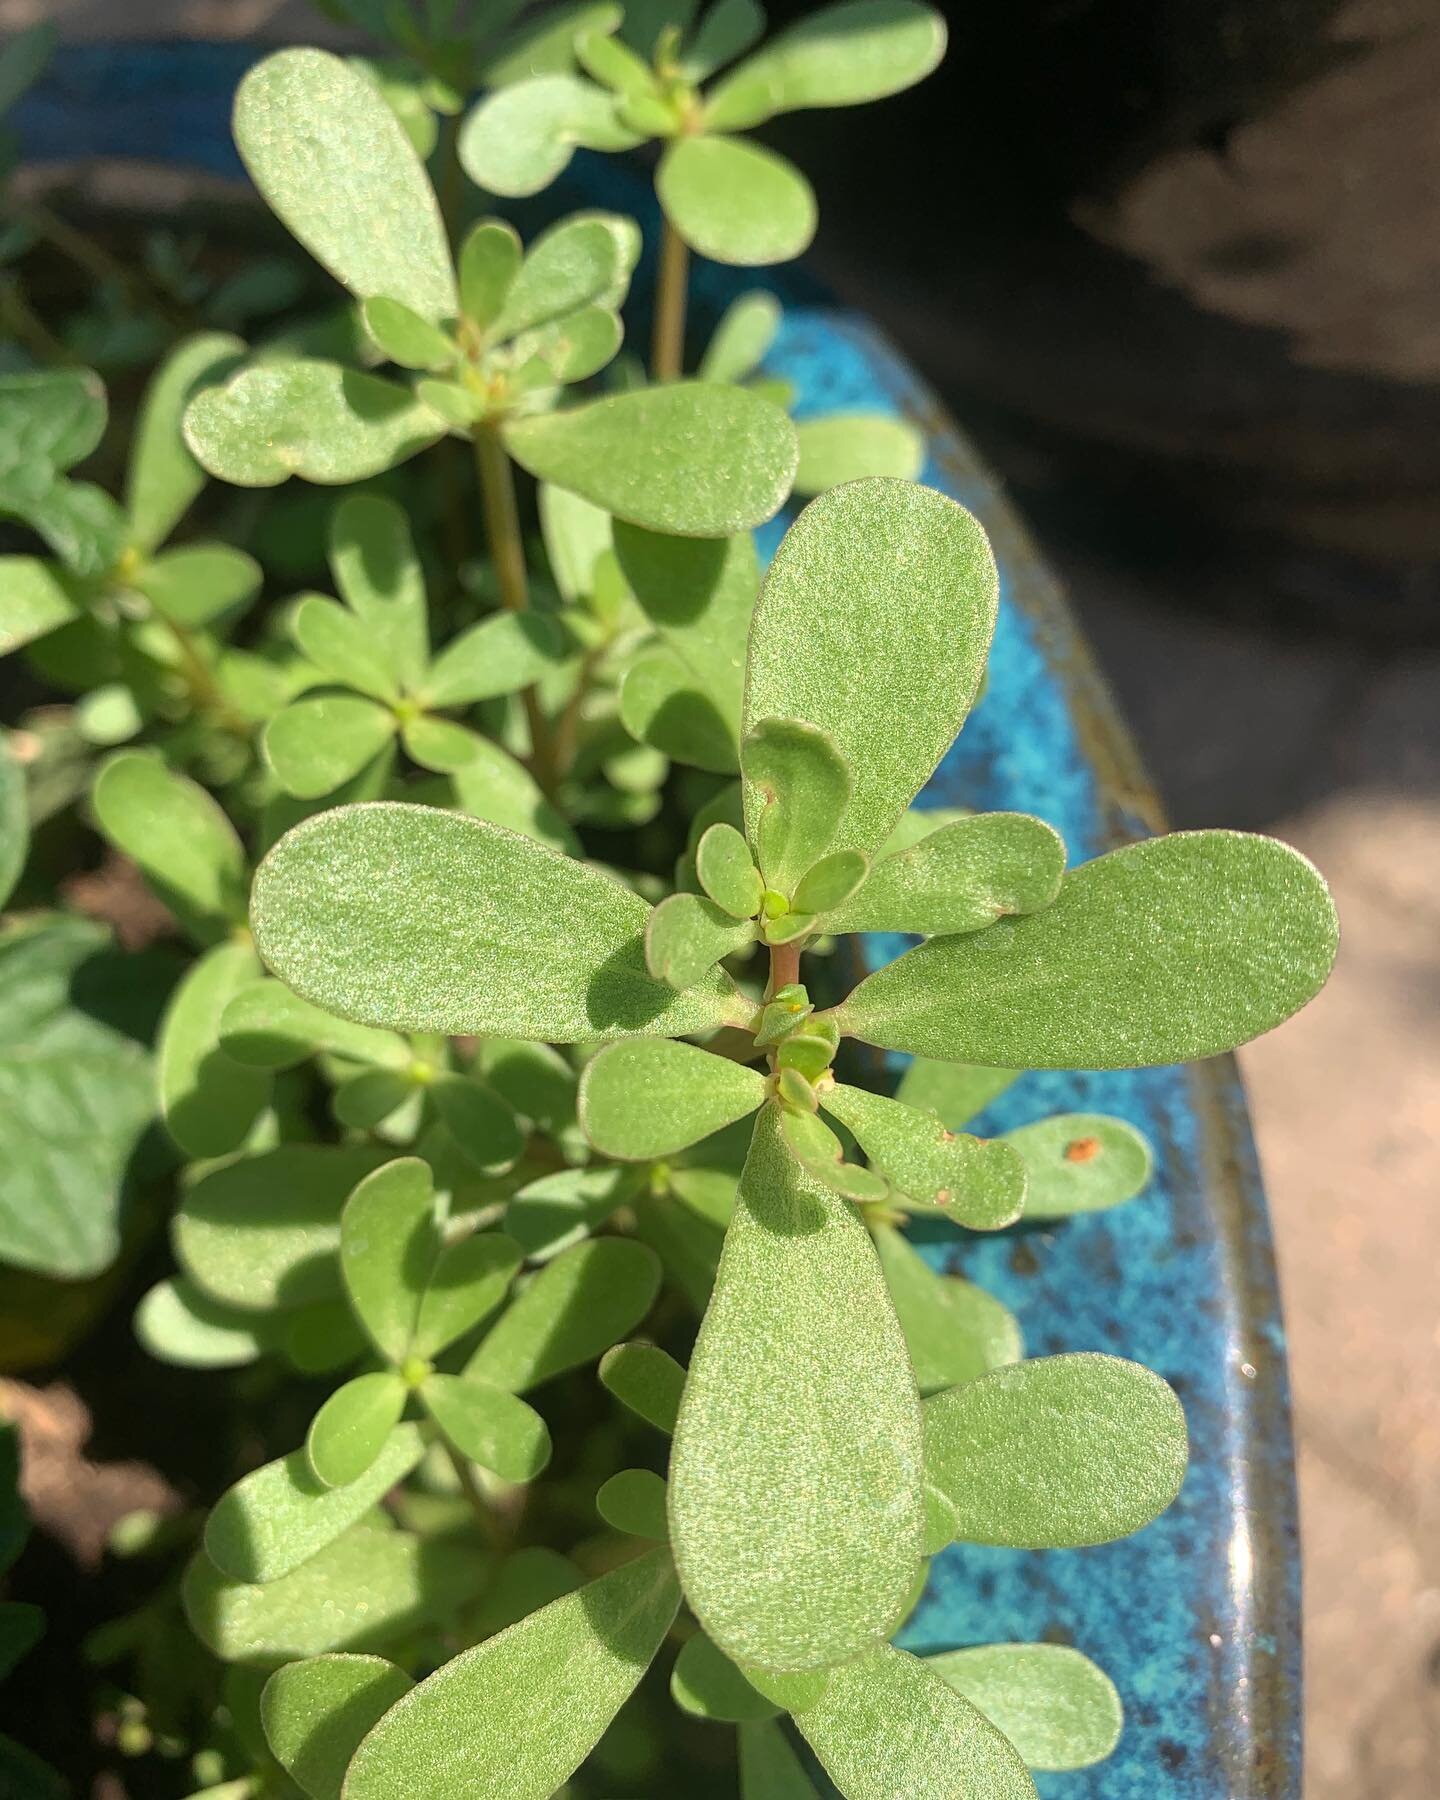 Purslane. Do you recognize this plant?? Many folks think of purslane as a weed. It&rsquo;s very likely growing in your garden right now! Grin. It&rsquo;s tart &amp; lemony and contains high amounts of omega-3 fatty acids - the most of any green plant